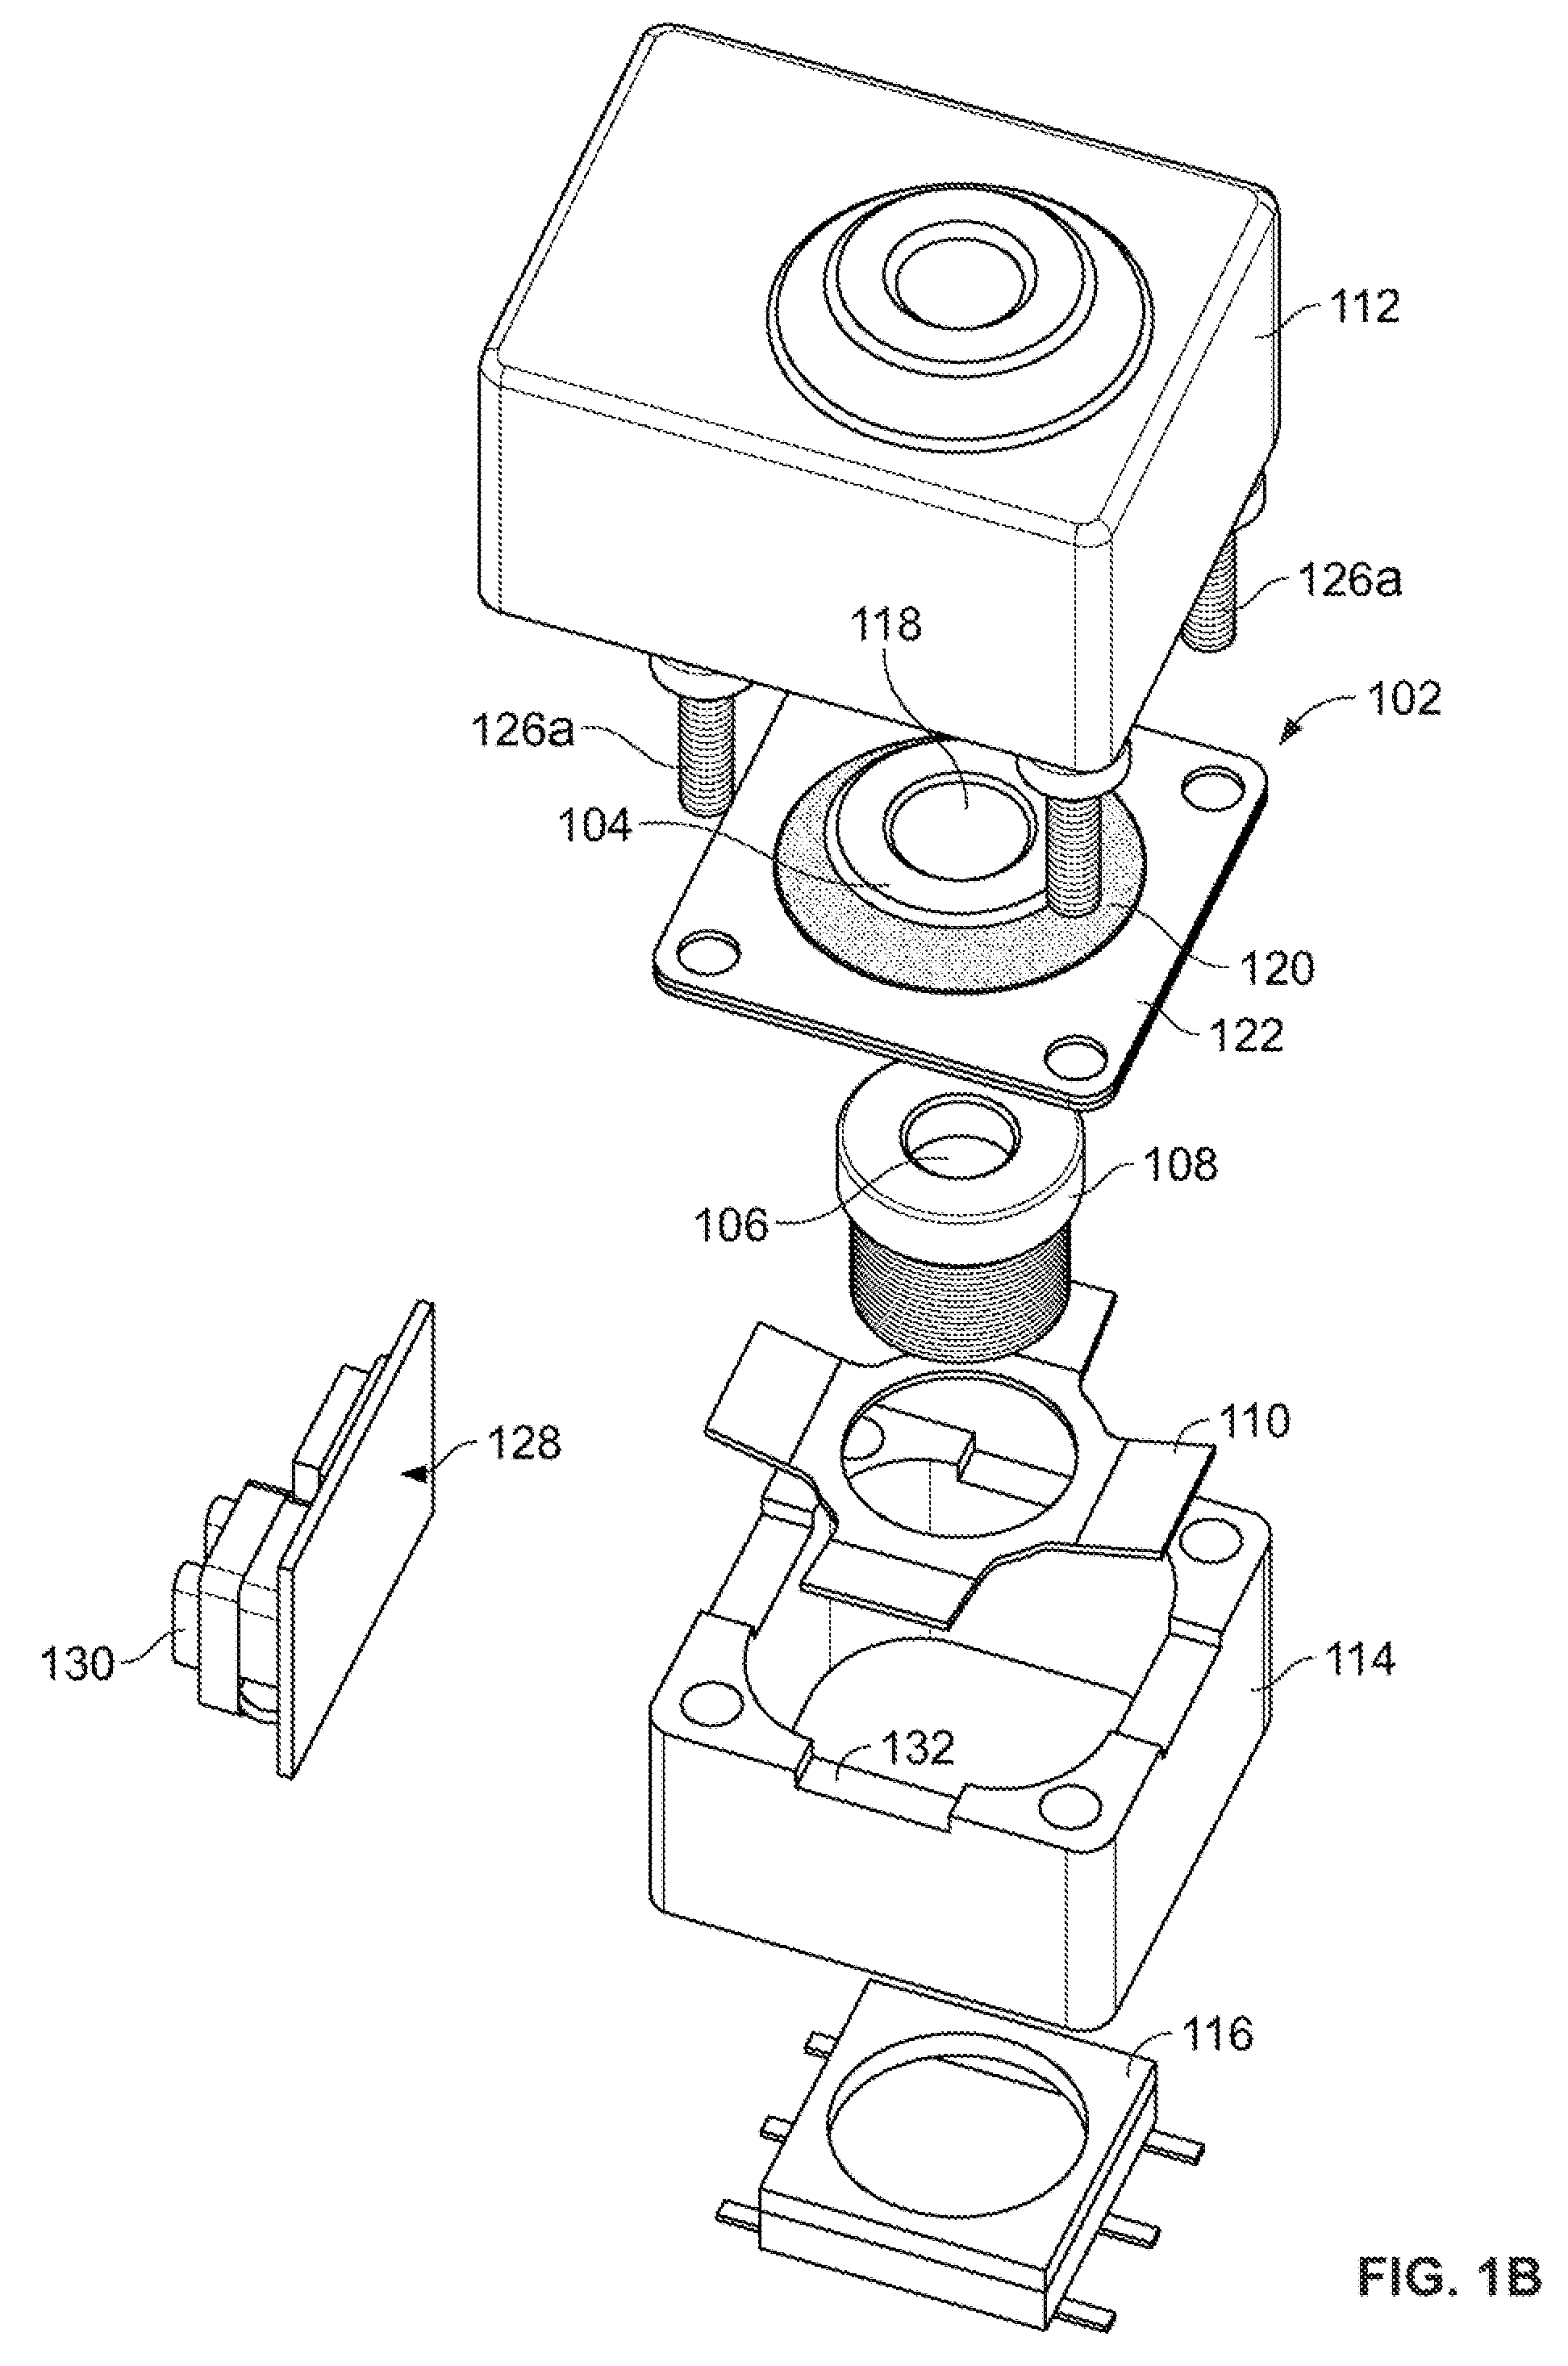 Lens shutter and aperture control devices